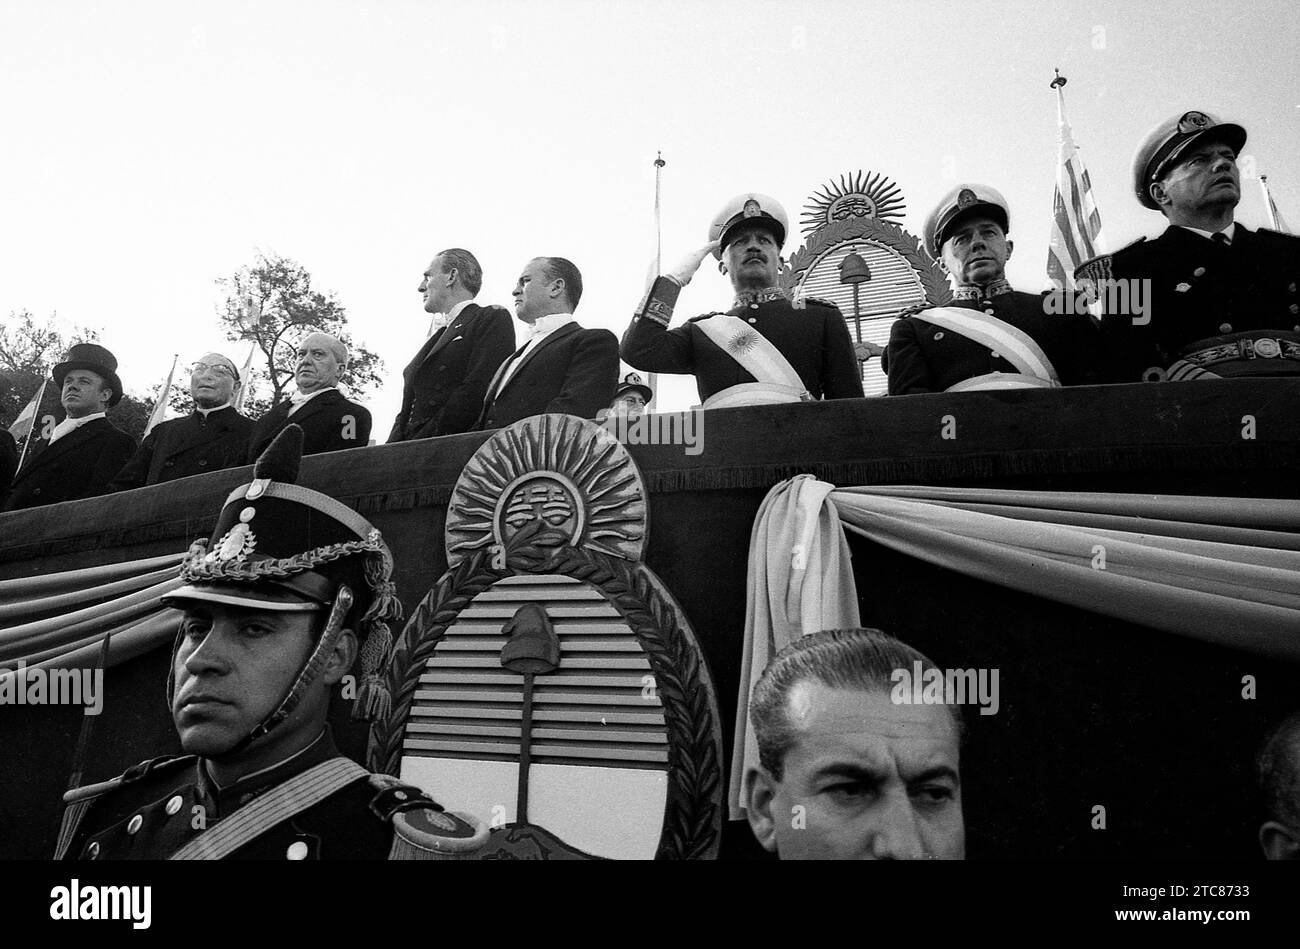 Independence Day military parade in Argentina. President General Juan Carlos Onganía (saluting, center) with General Julio Alsagaray (center right), Uruguayan President Jorge Pacheco Areco (center left), Emilio van Peborgh at Pacheco Arecos´s left, unidentified person, Cardinal Antonio Caggiano and Nicanor Costa Méndez (far left), Buenos Aires, July11, 1968. Stock Photo